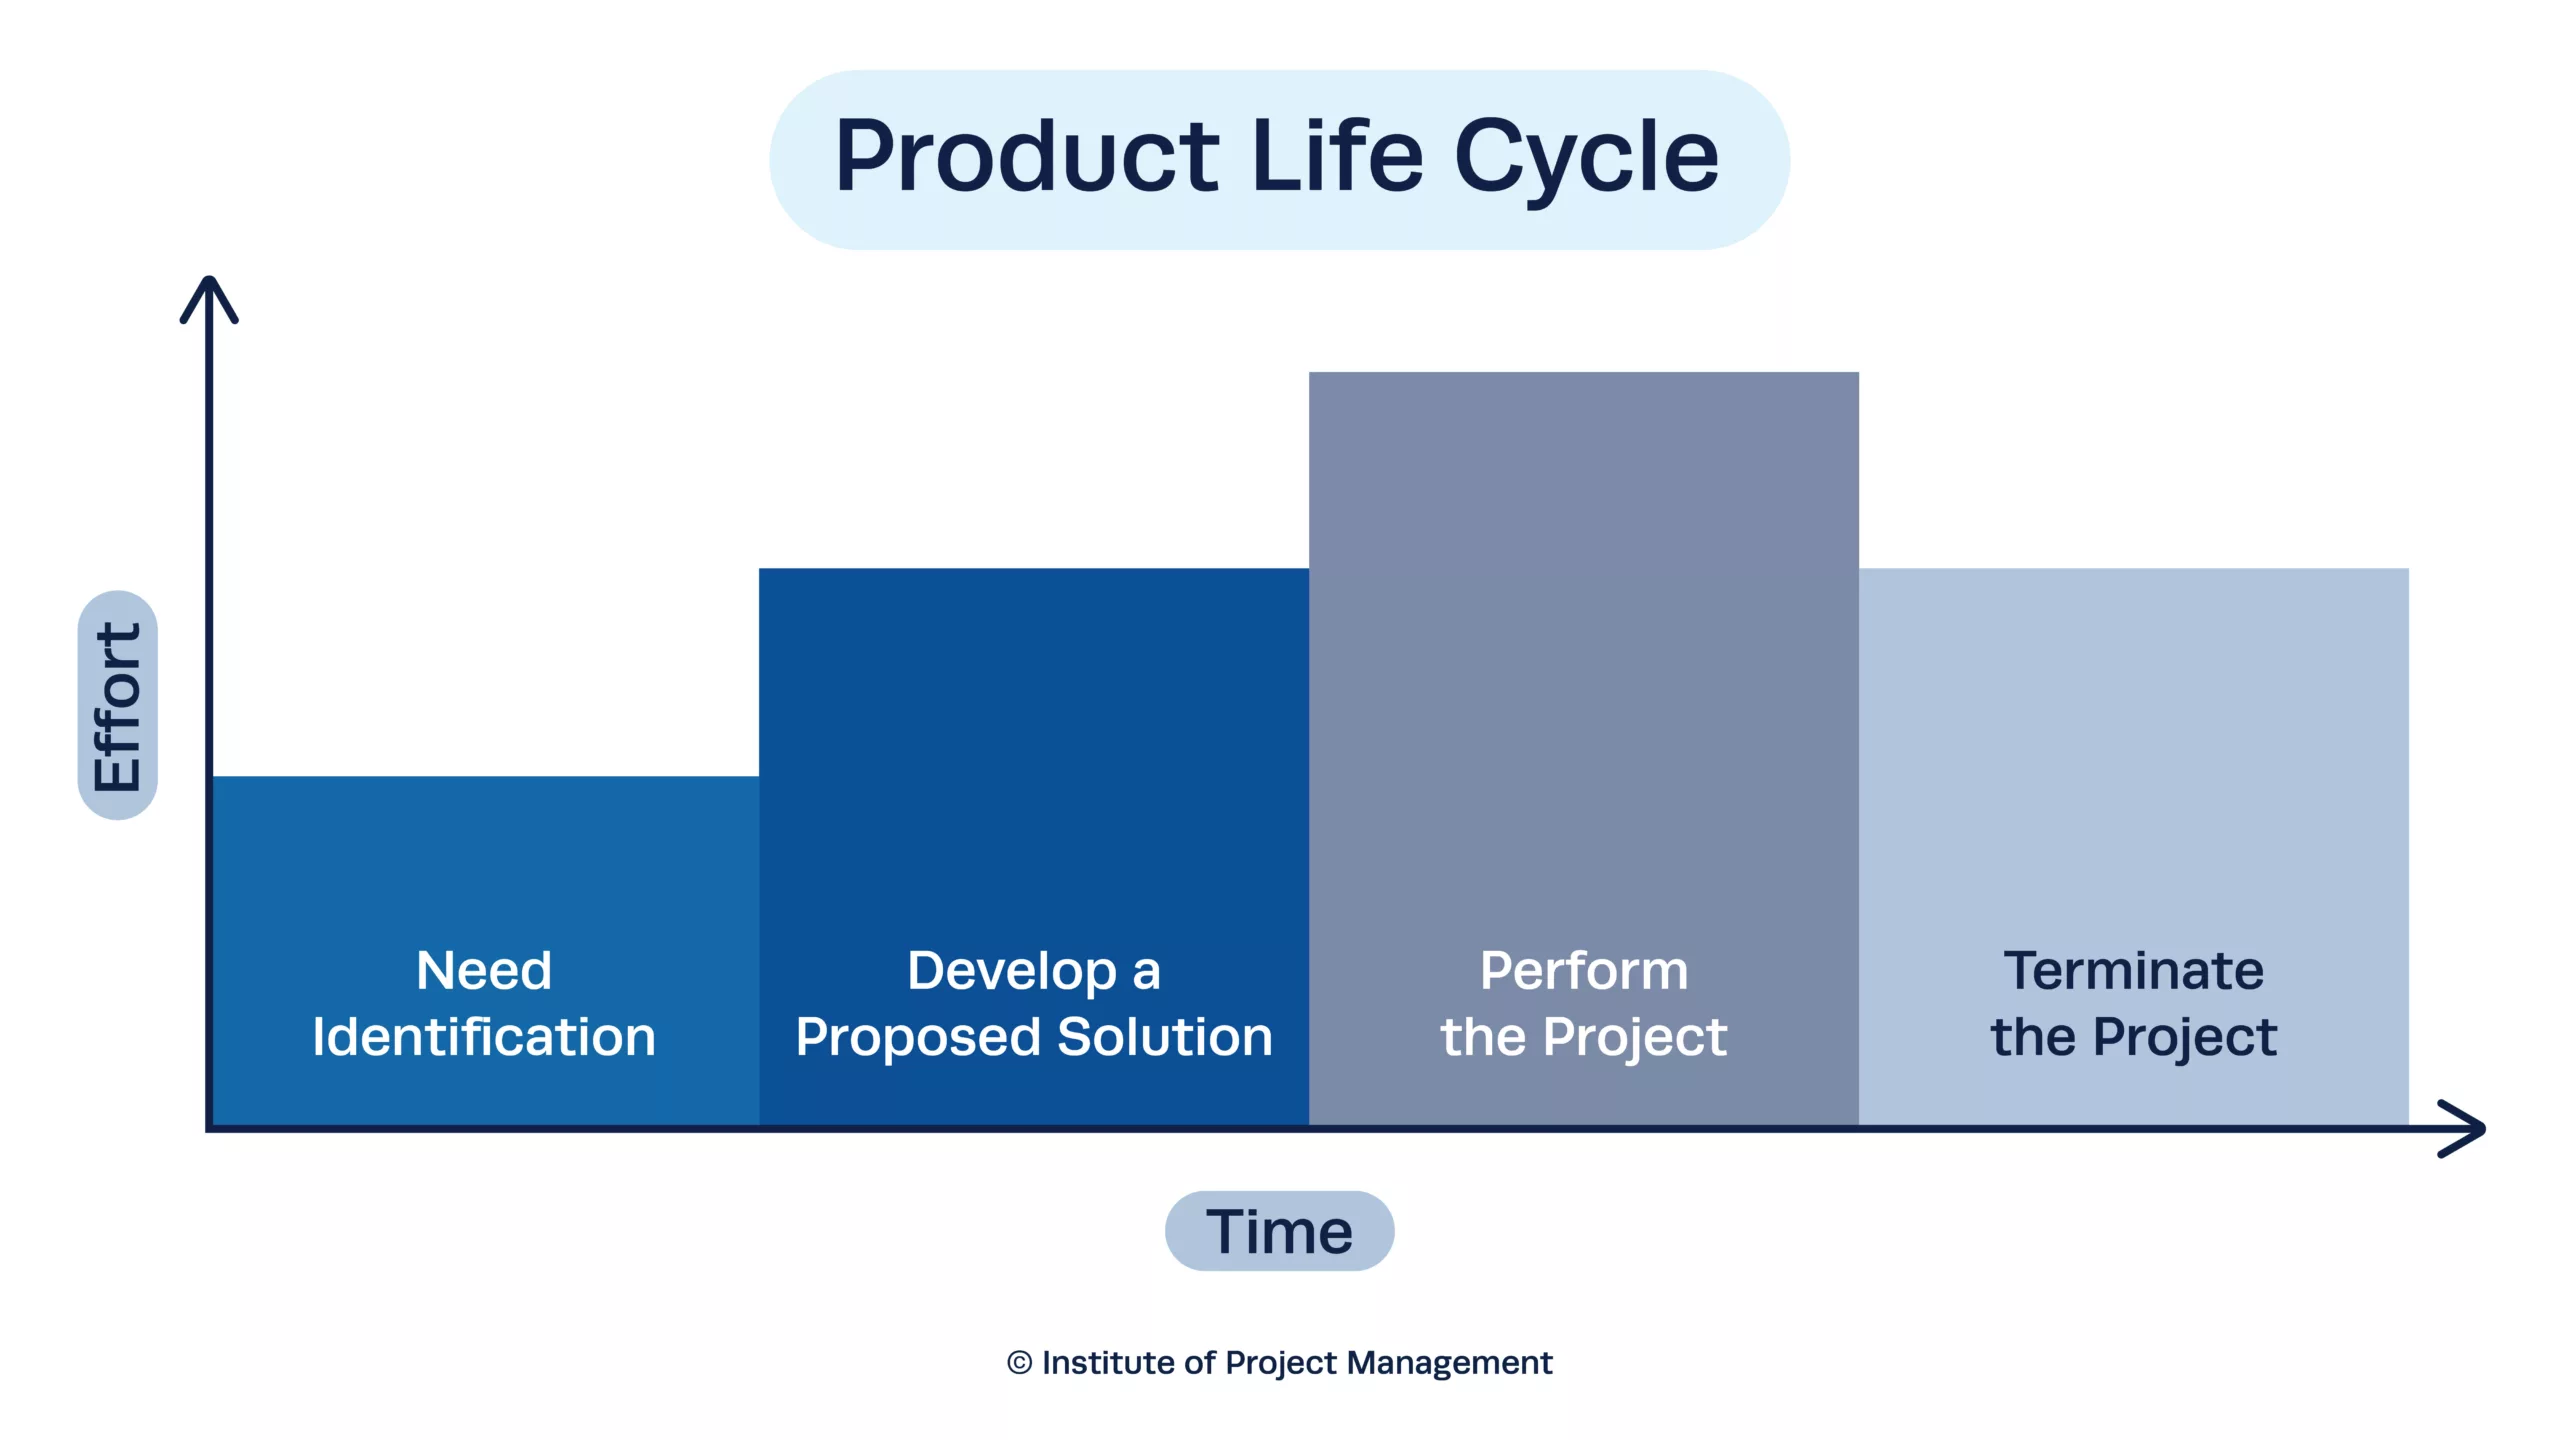 Product Life Cycle - project needs